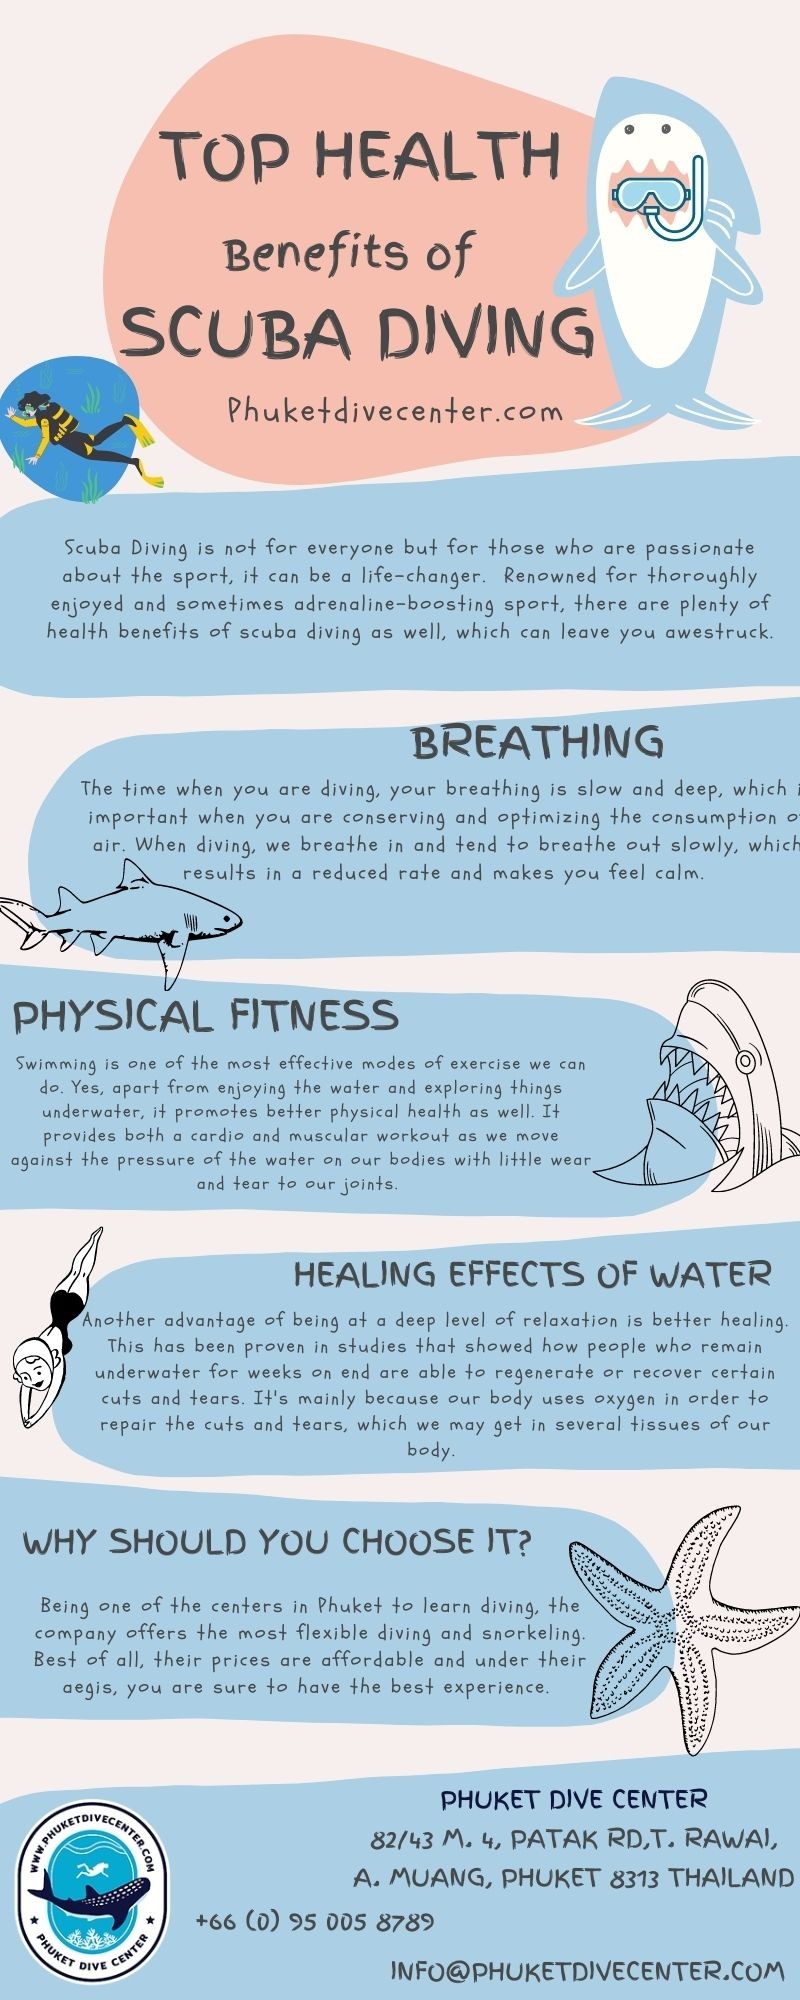 Top Health Benefits of Scuba Diving - Extraimage.org